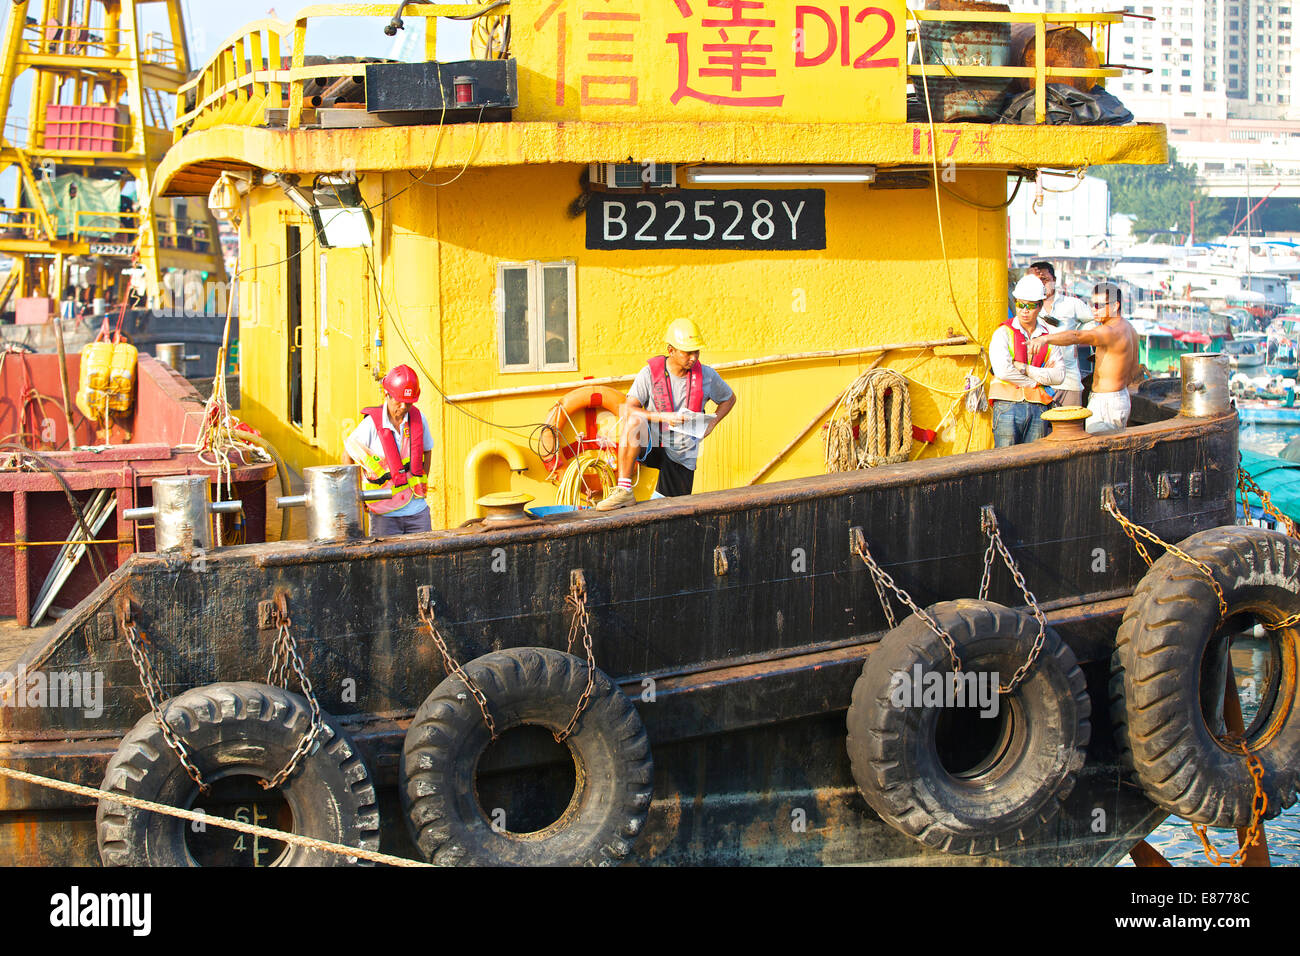 Team Of Engineers On The Deck Of A Derrick Barge In The Causeway Bay Typhoon Shelter, Hong Kong. Stock Photo